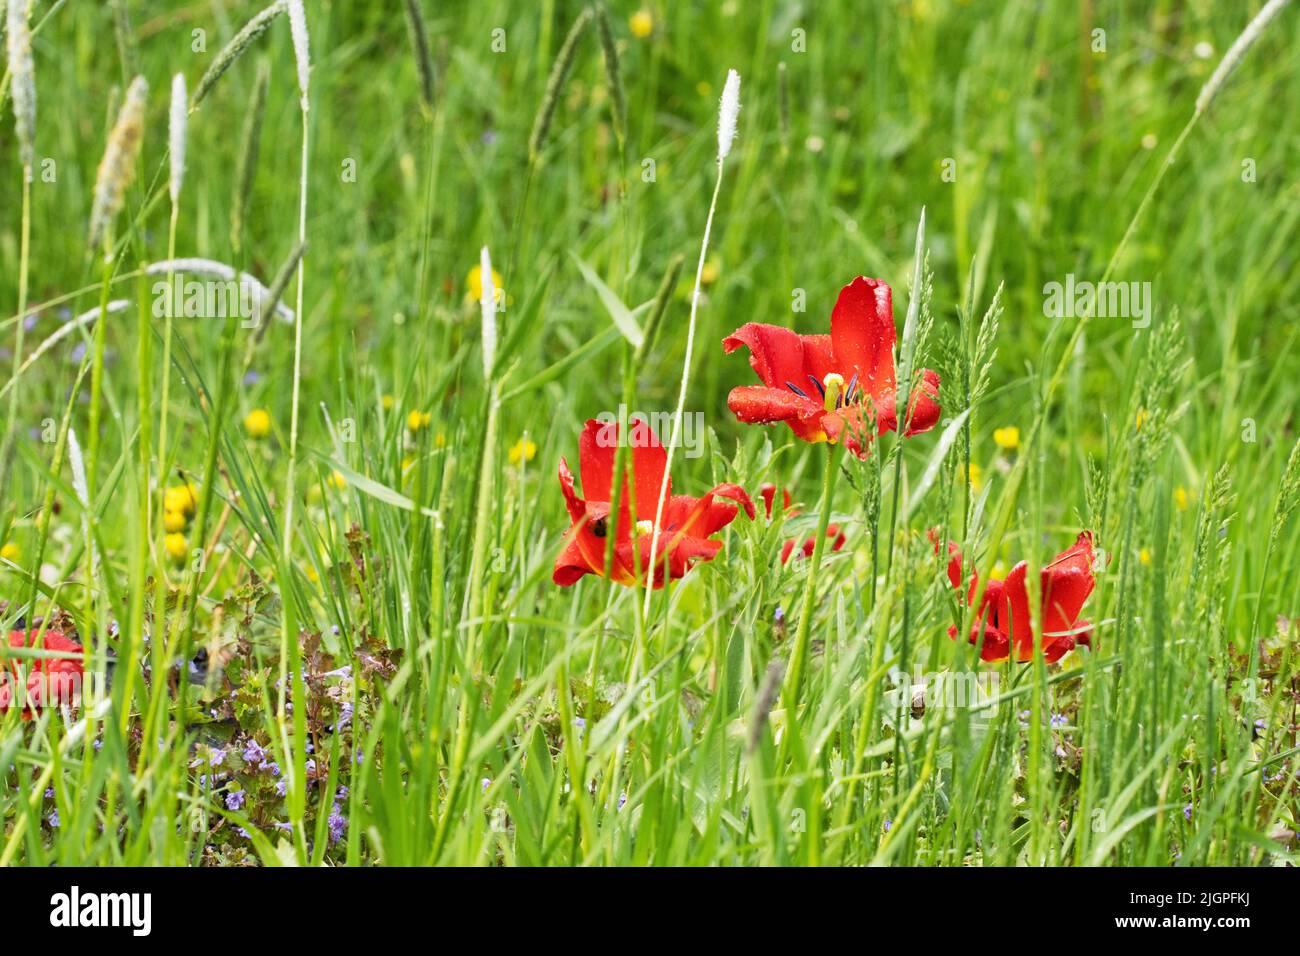 Bright red tulips blooming in tall lush grass Stock Photo